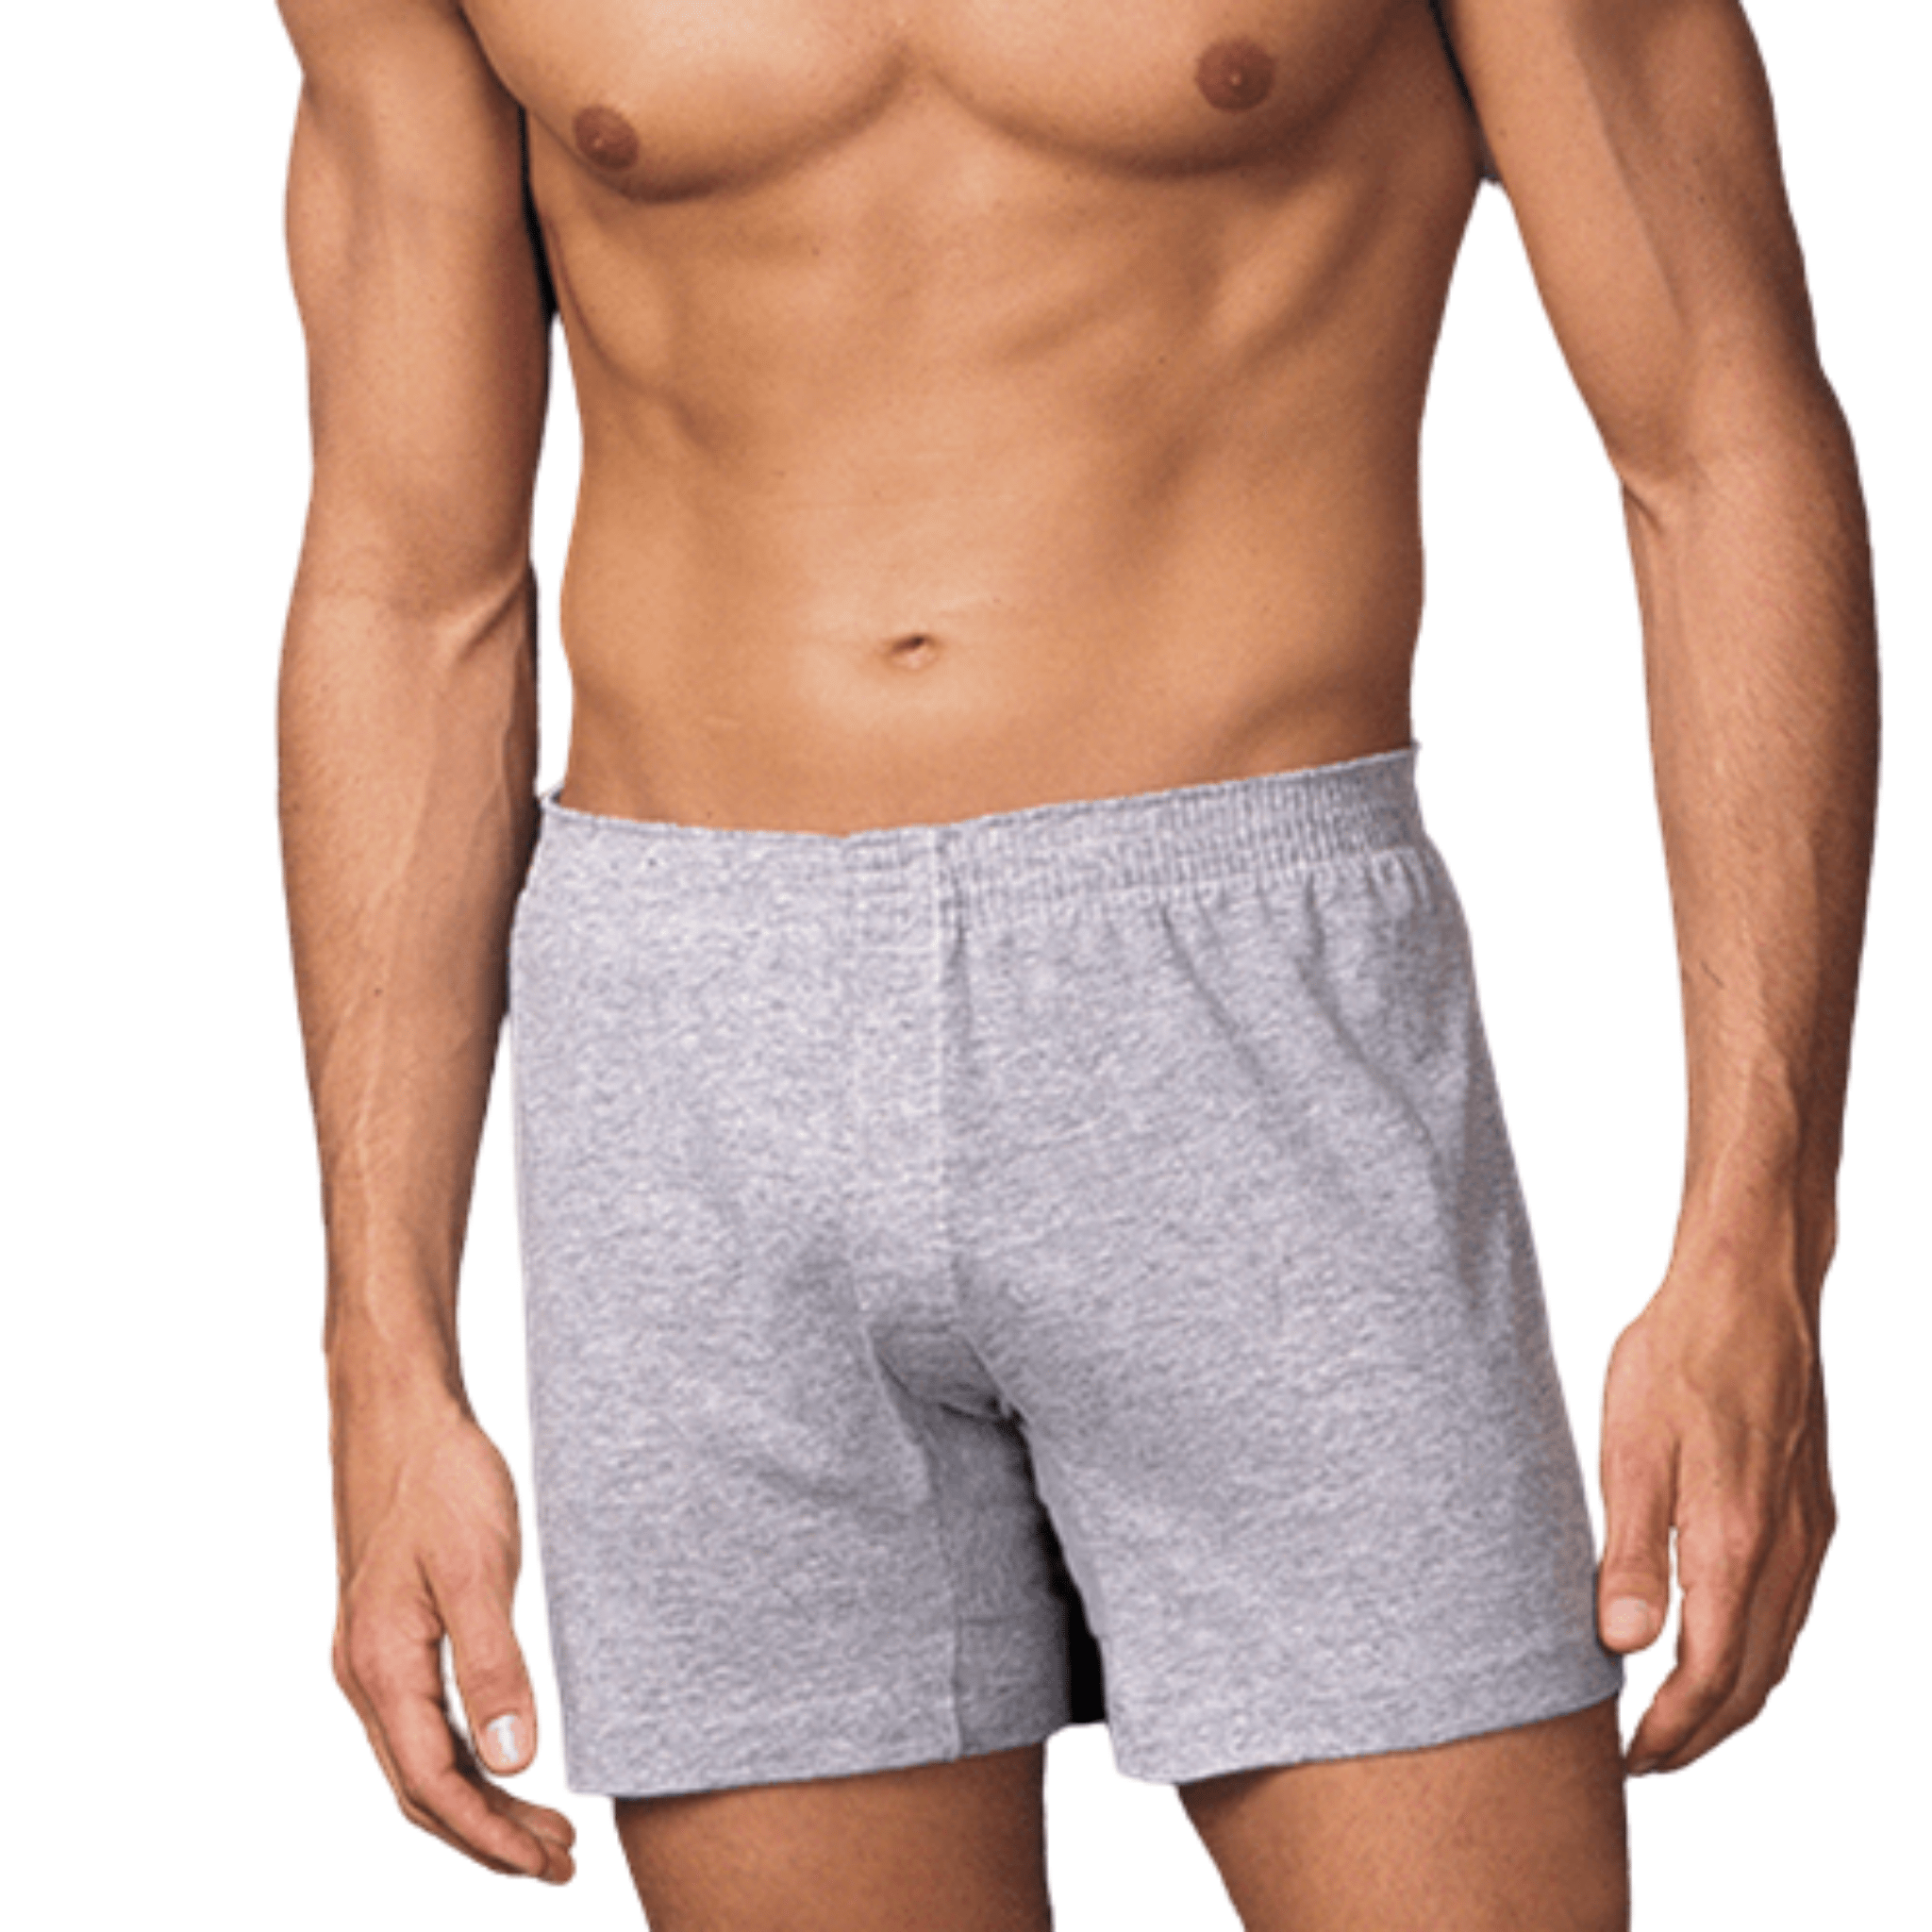 Jersey Knit Boxer Briefs for Men